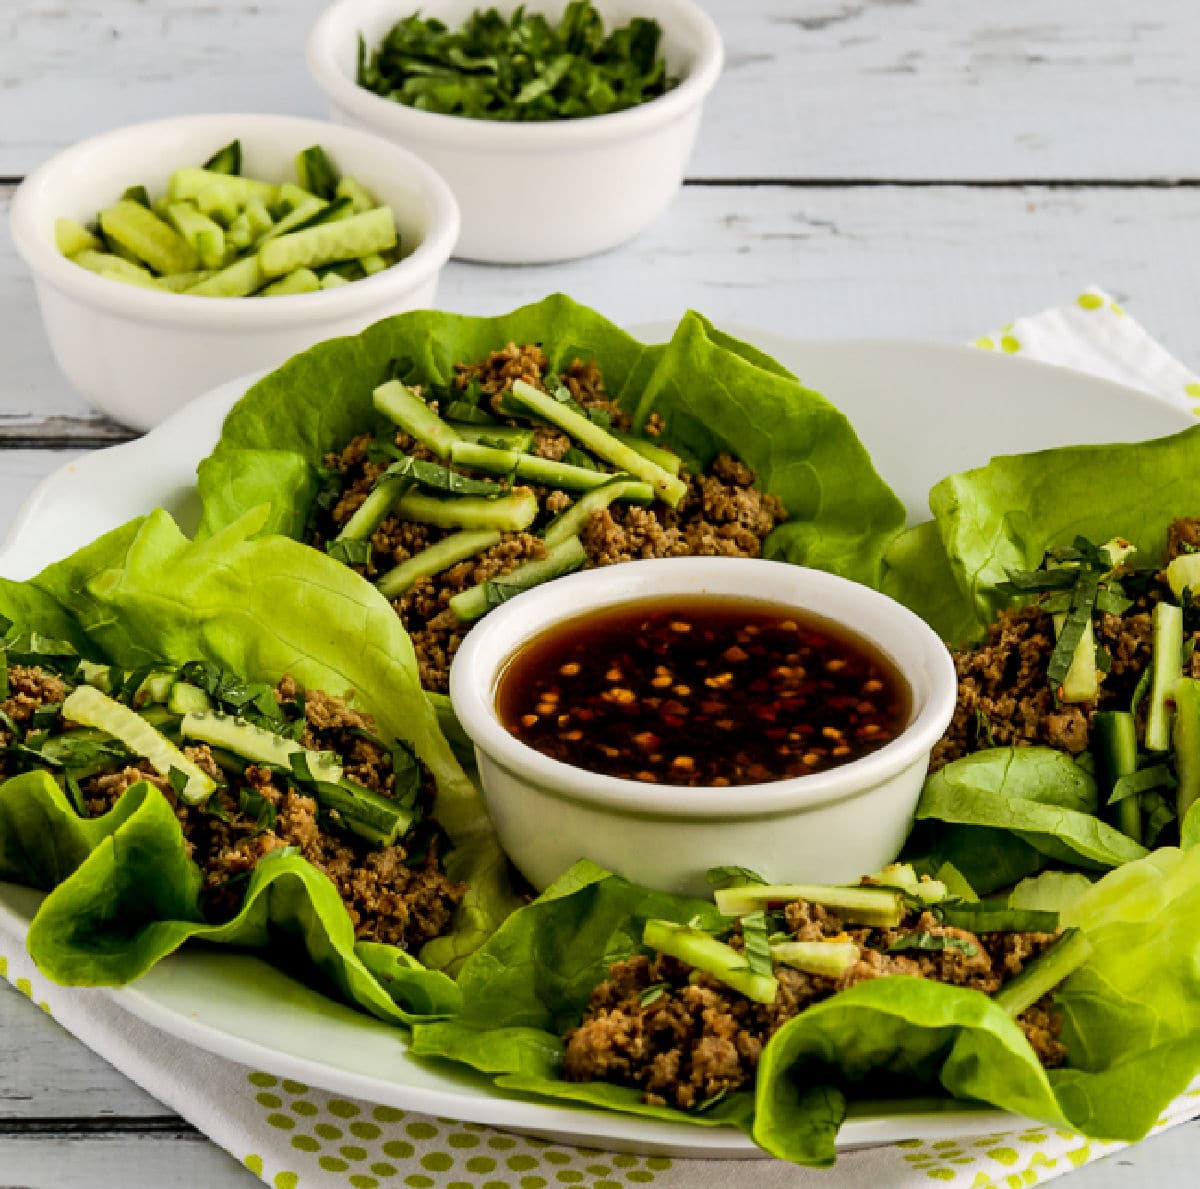 Thai Turkey Lettuce Wraps shown on serving plate with dish of sauce in center.